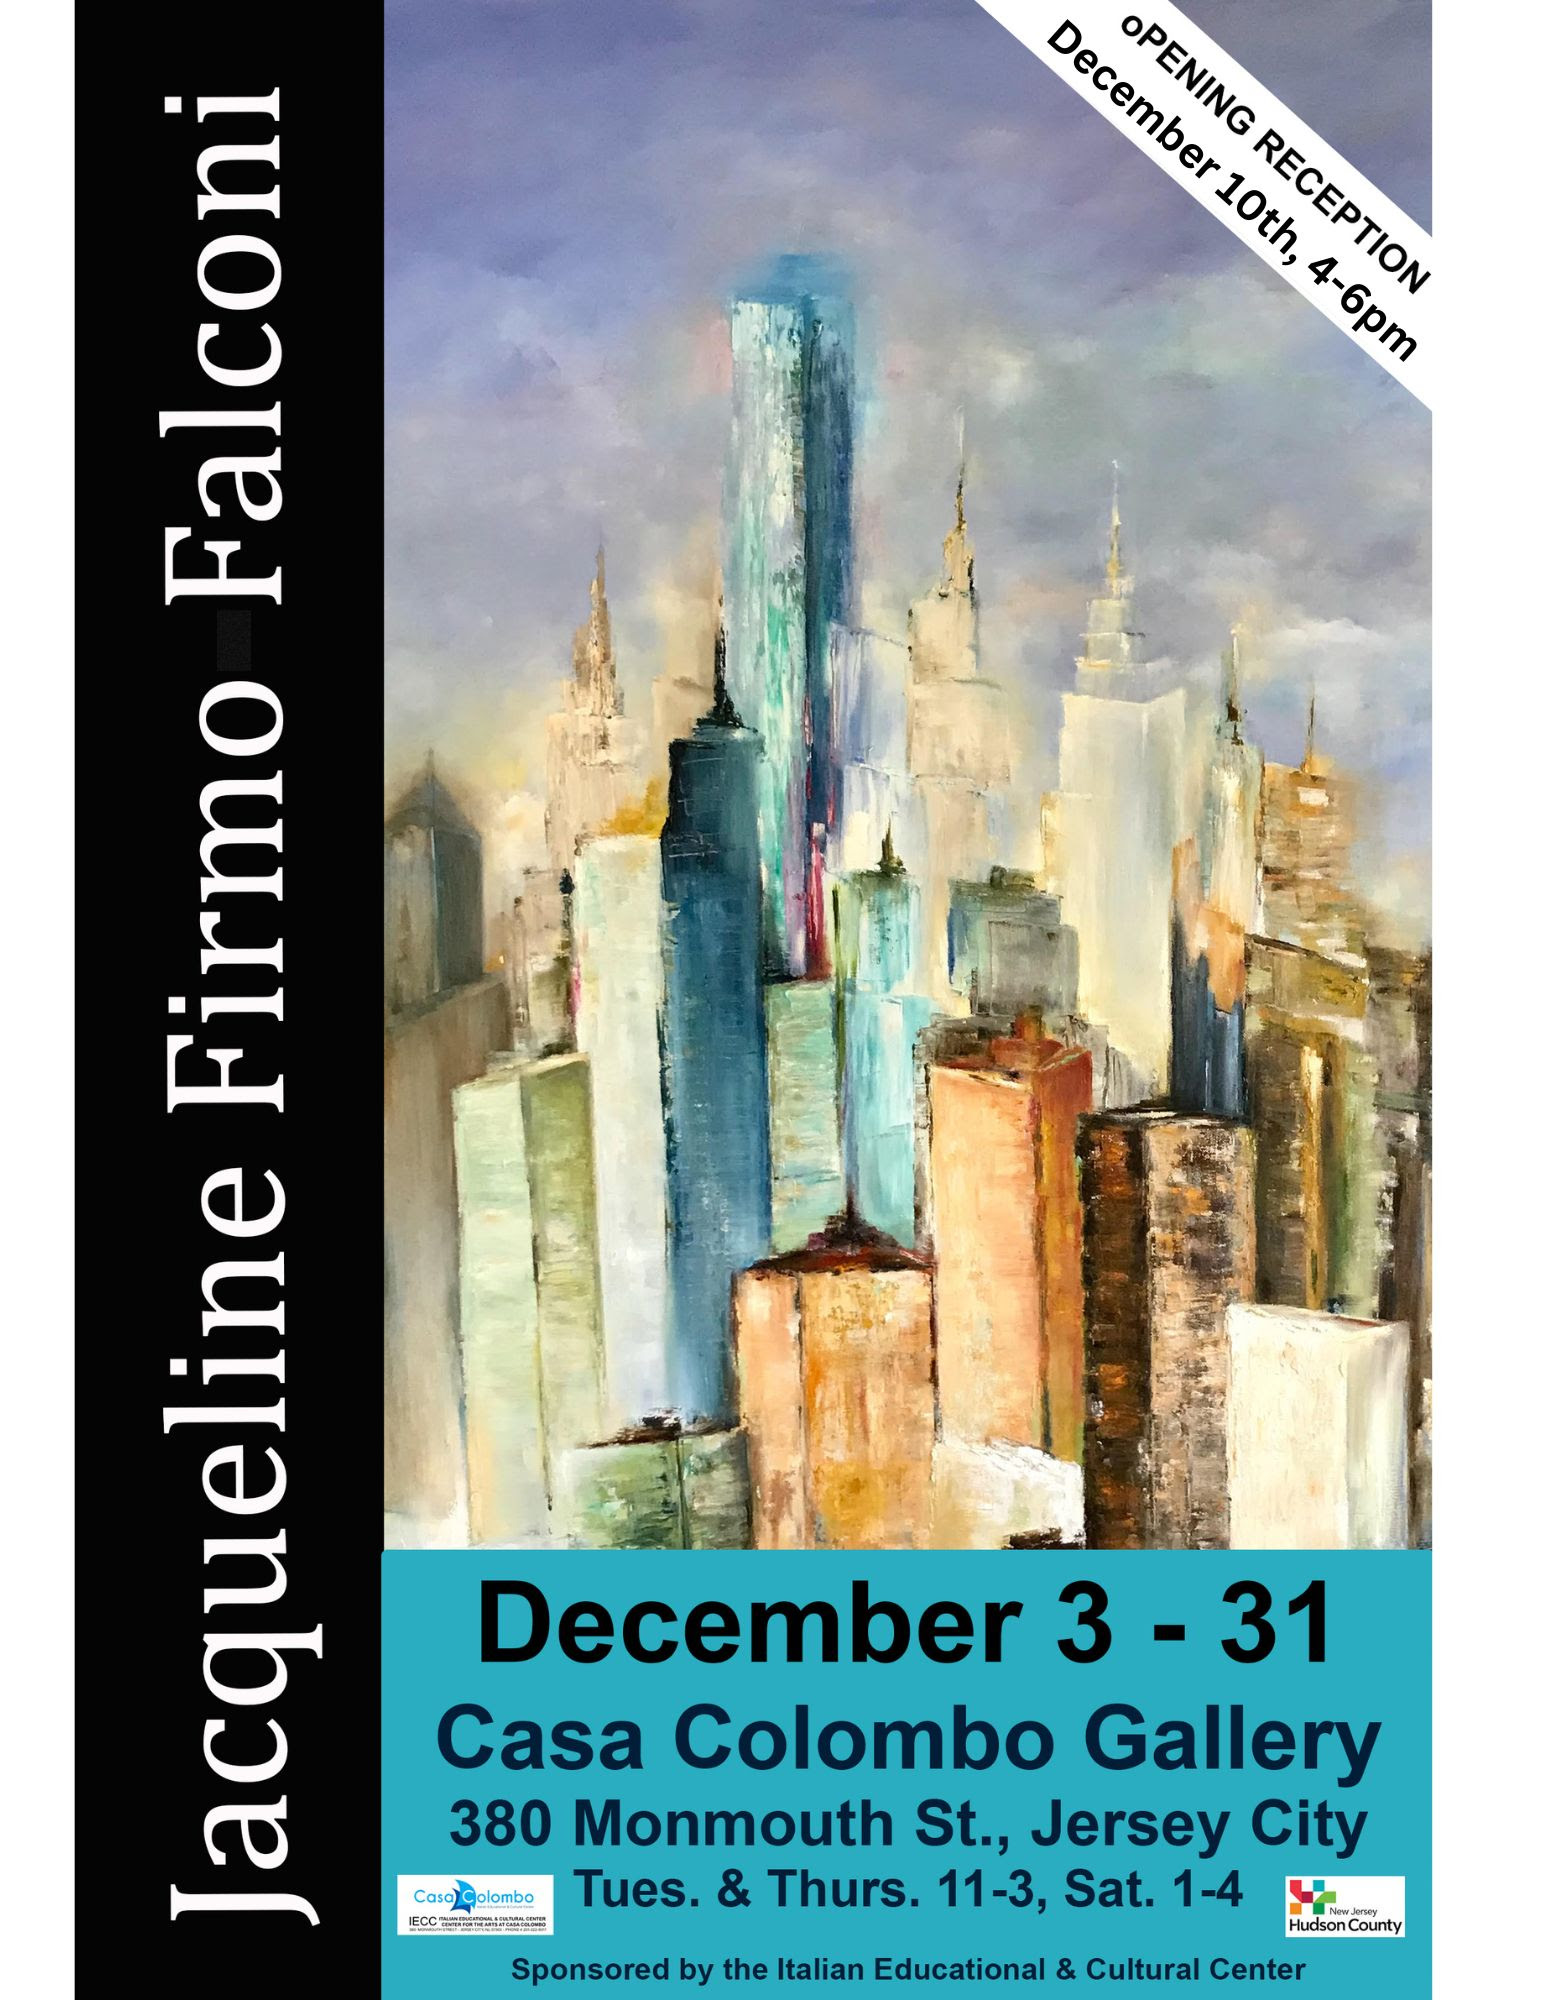 Jacqueline Firmo Falconi; December 3-31 at Casa Colombo Gallery, 380 Monmouth St. Jersey City, Tues. & Thurs 11-3, Sat. 1-4